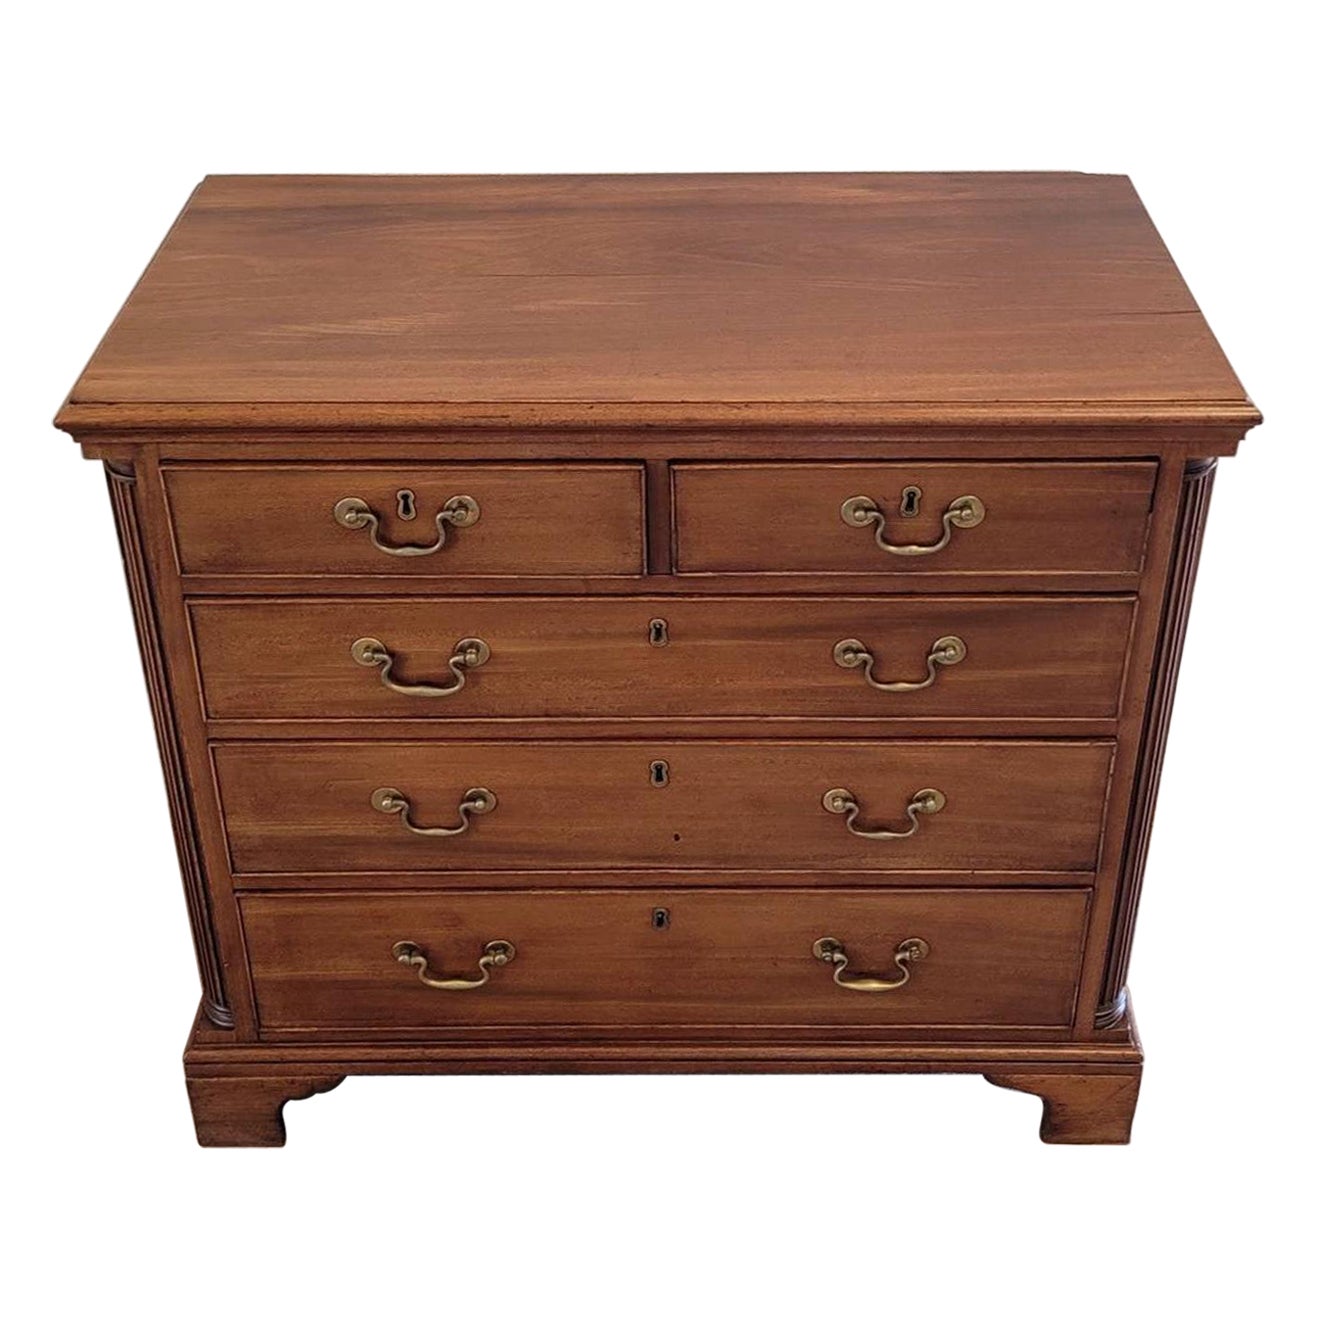 19th Century American Federal Bachelor's Chest of Drawers